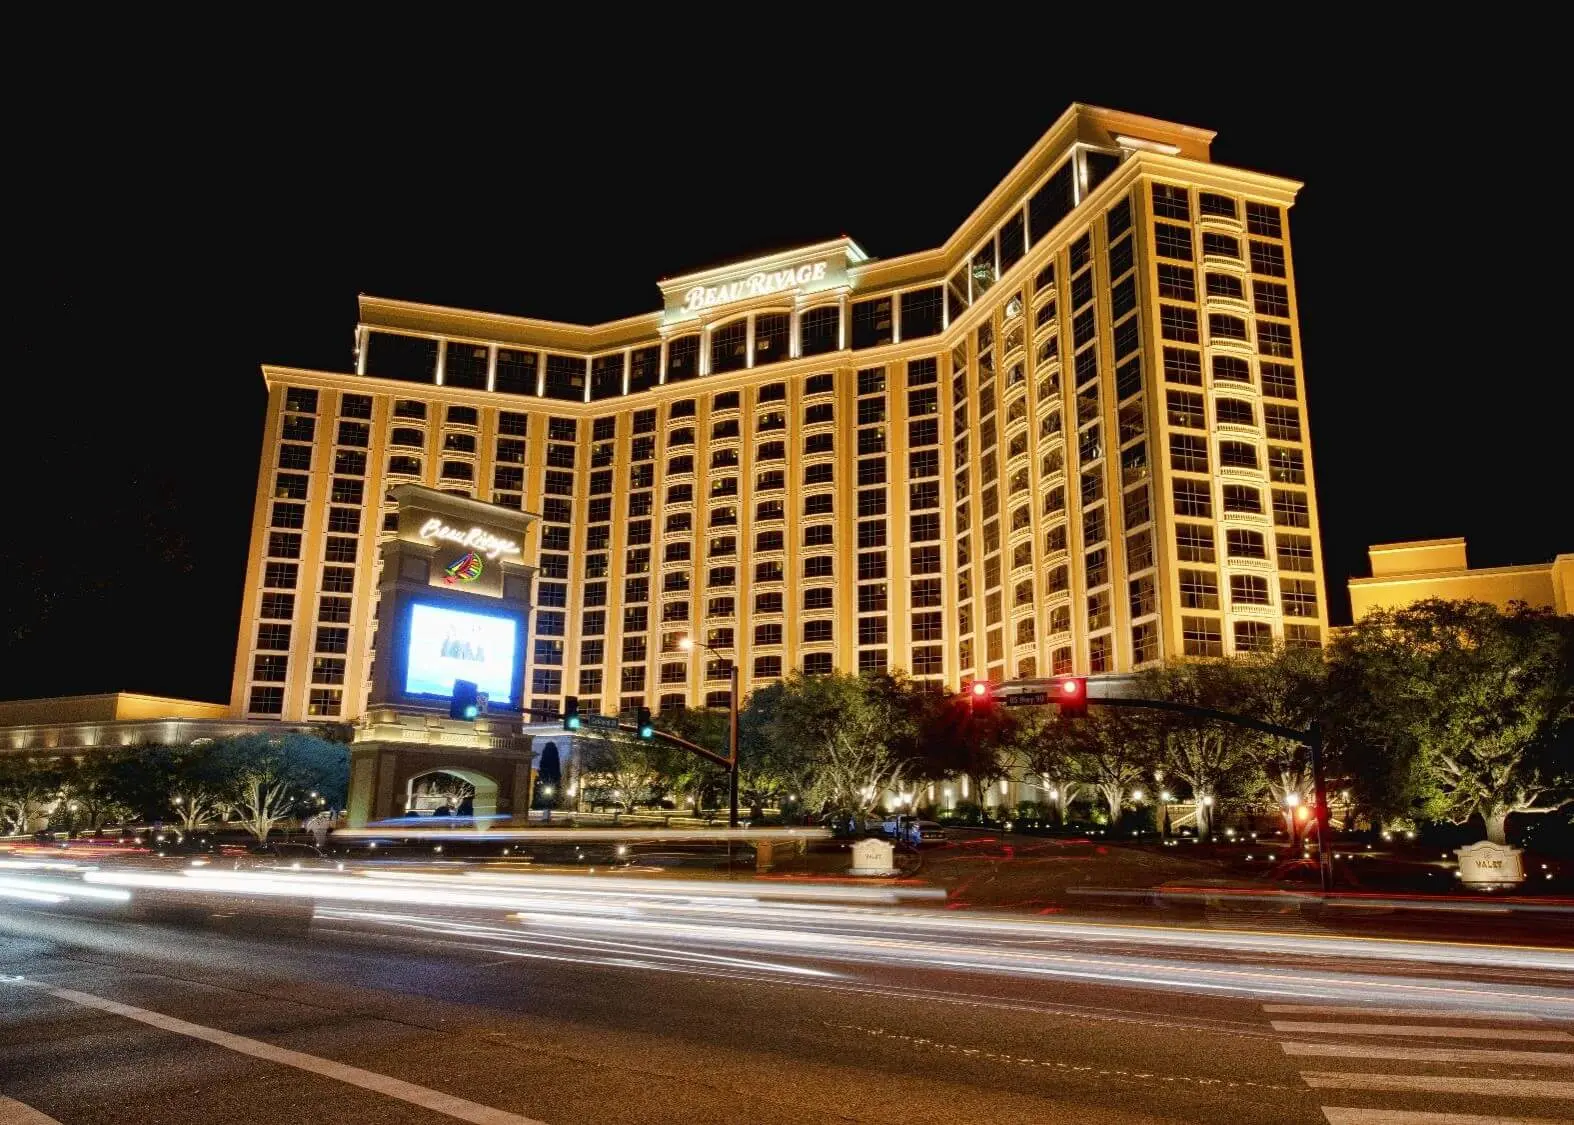 Image of the fronting of the Beau Rivage casino and hotel in Mississippi at nighttime 